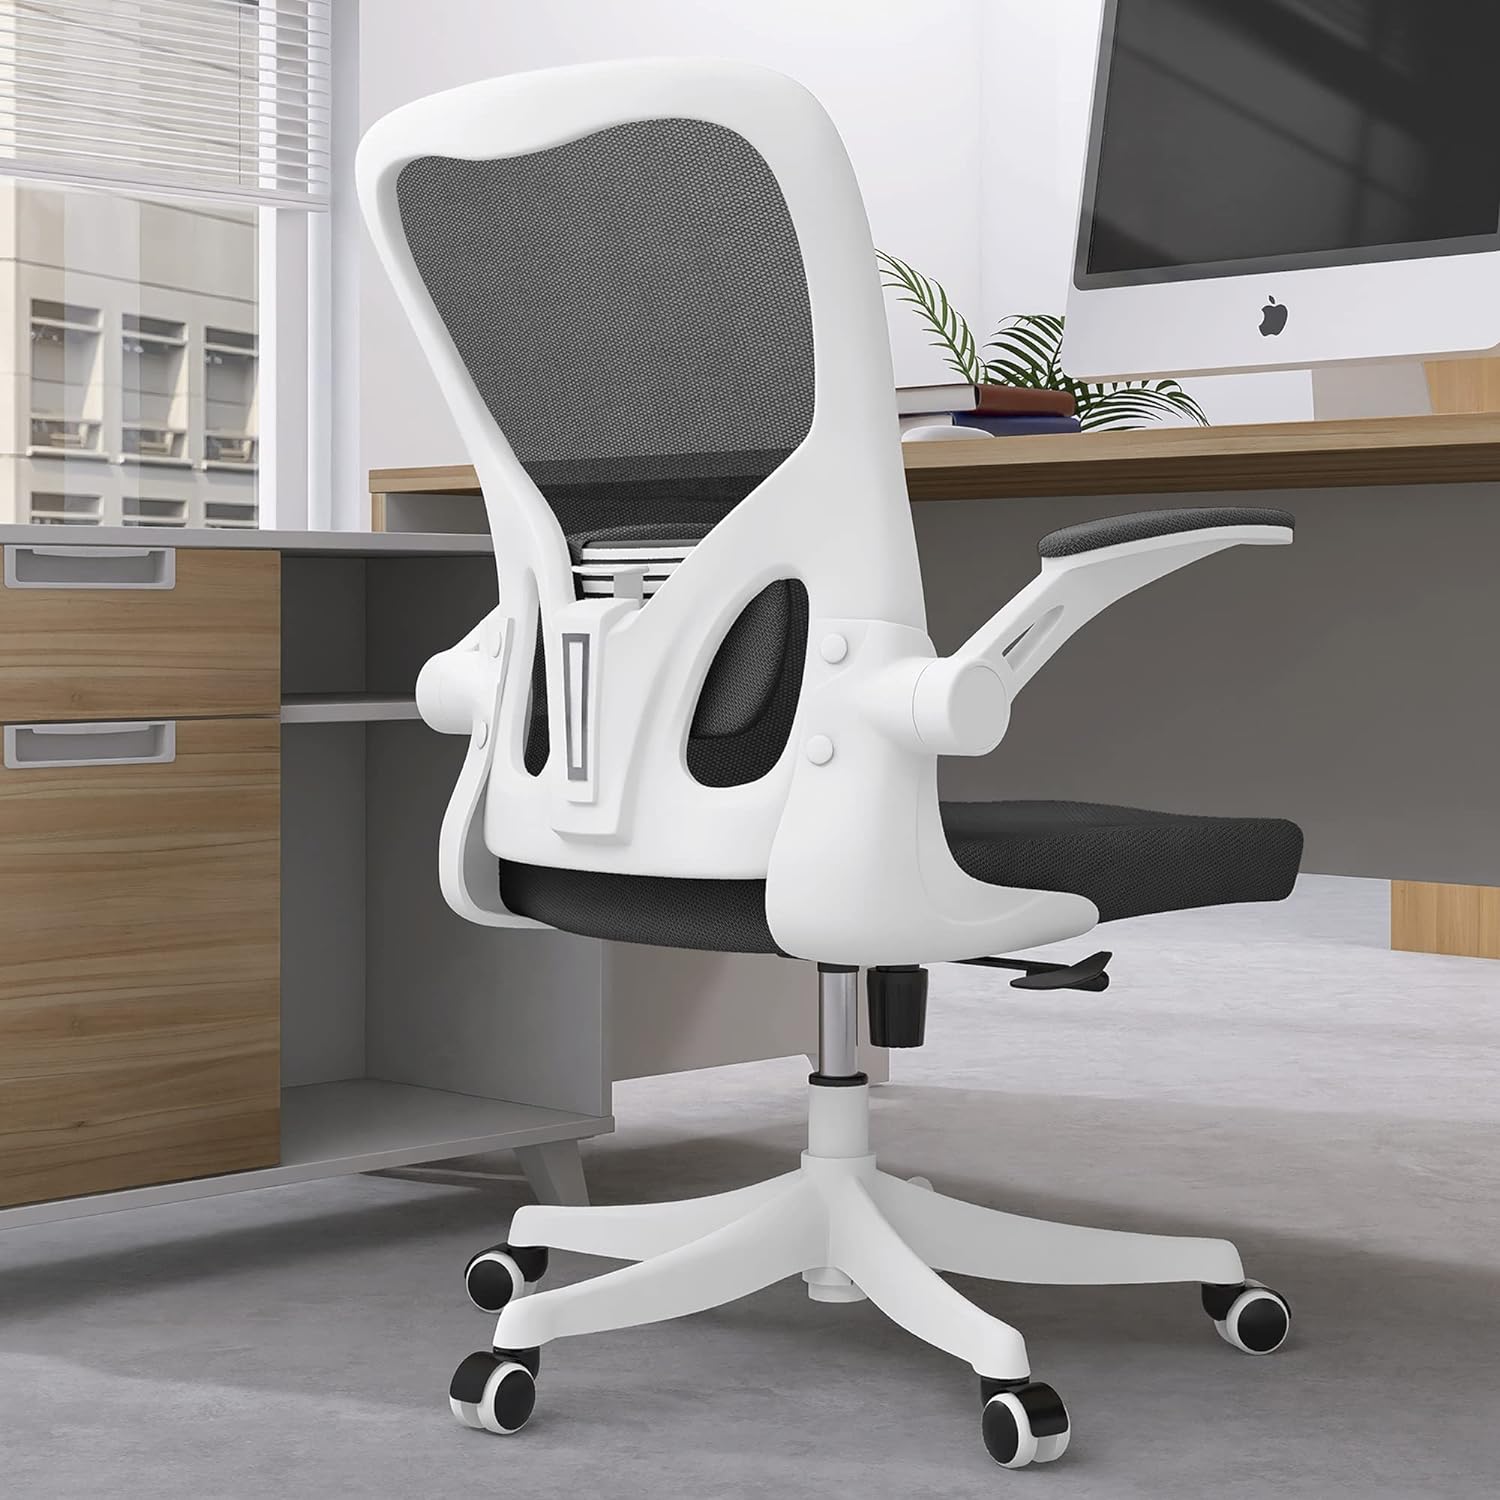 Monhey Office Chair - Ergonomic Office Chair with Lumbar Support & Flip Up Arms Home Office Desk Chairs Rockable High Back Swivel Computer Chair White Frame & Black Mesh Study Chair